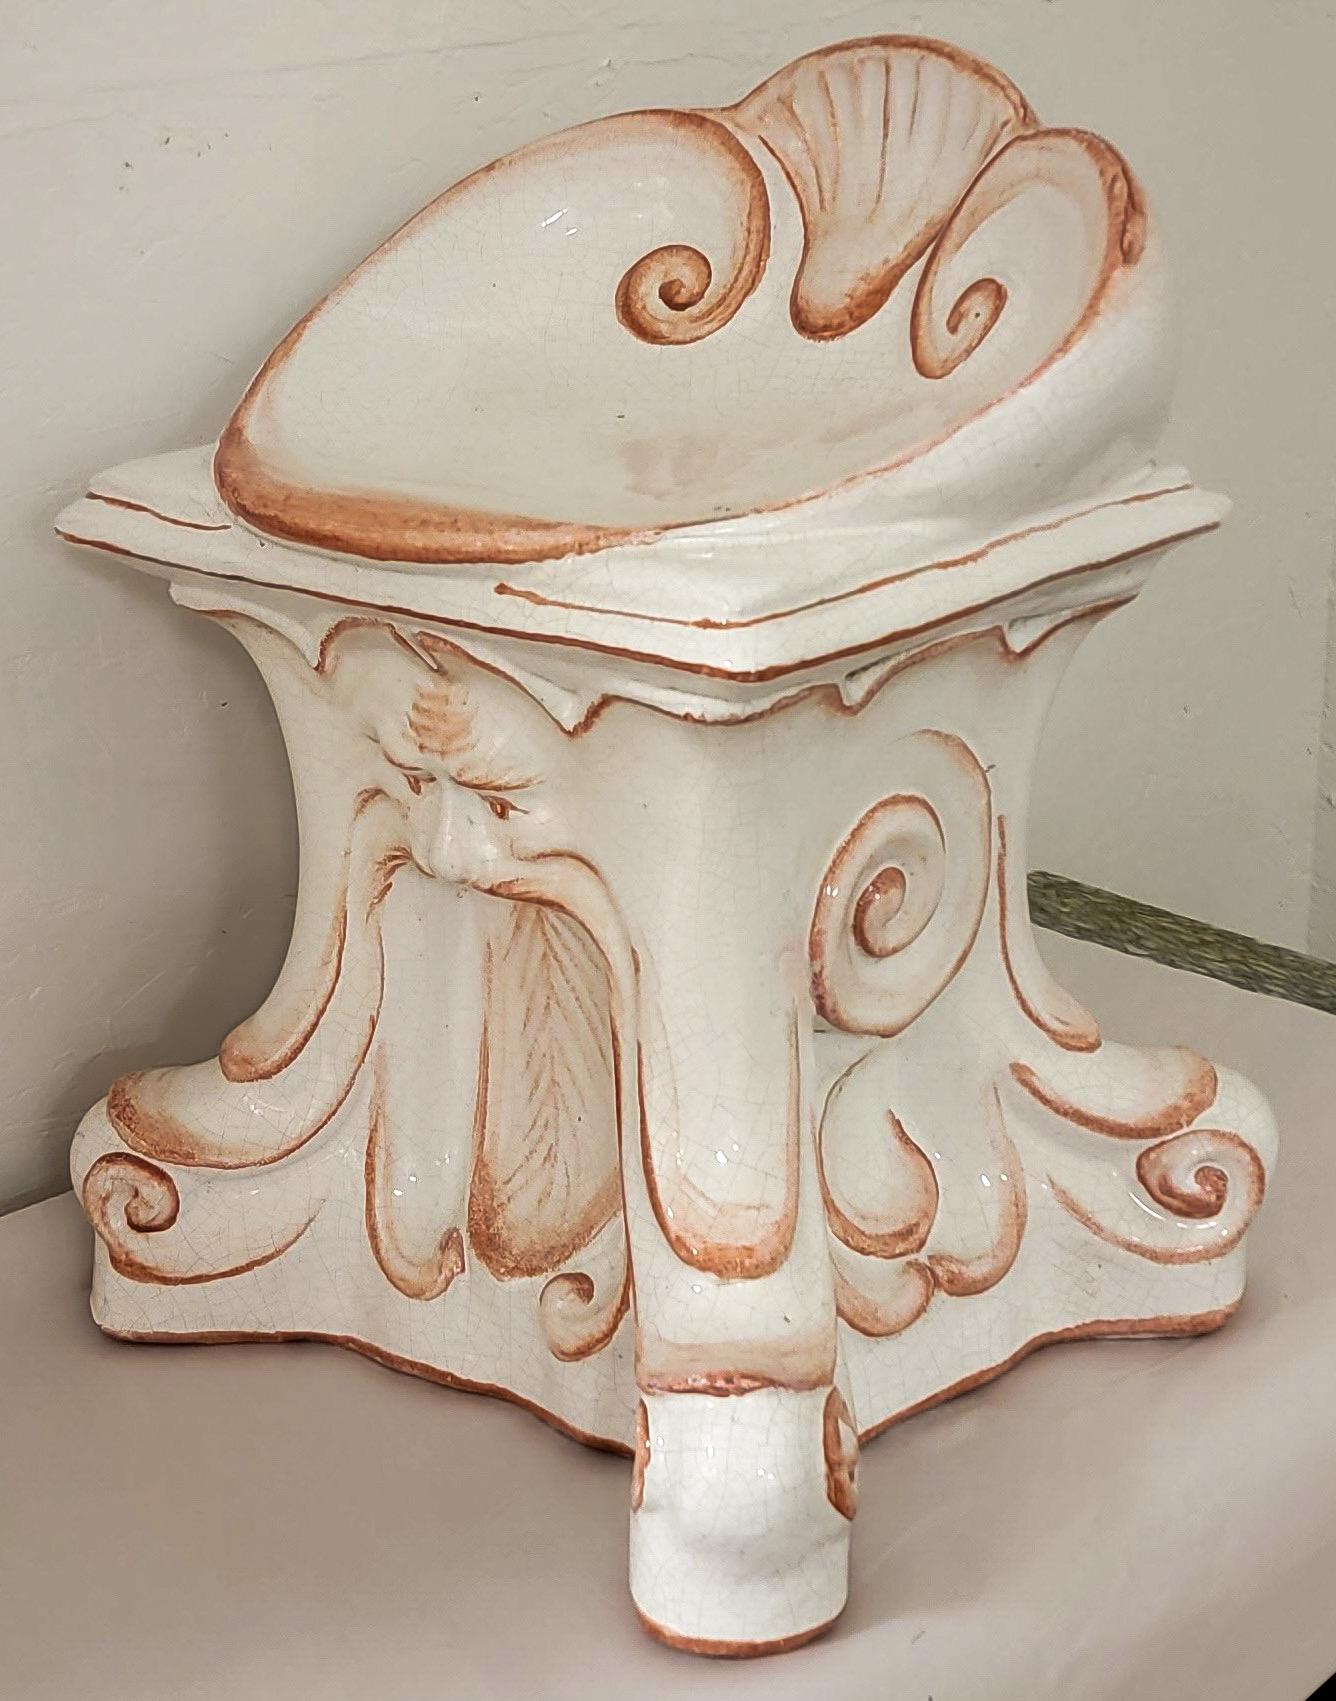 20th Century 1960s Italian Terracotta North Wind and Shell Motif Garden Seat / Chair / Stool